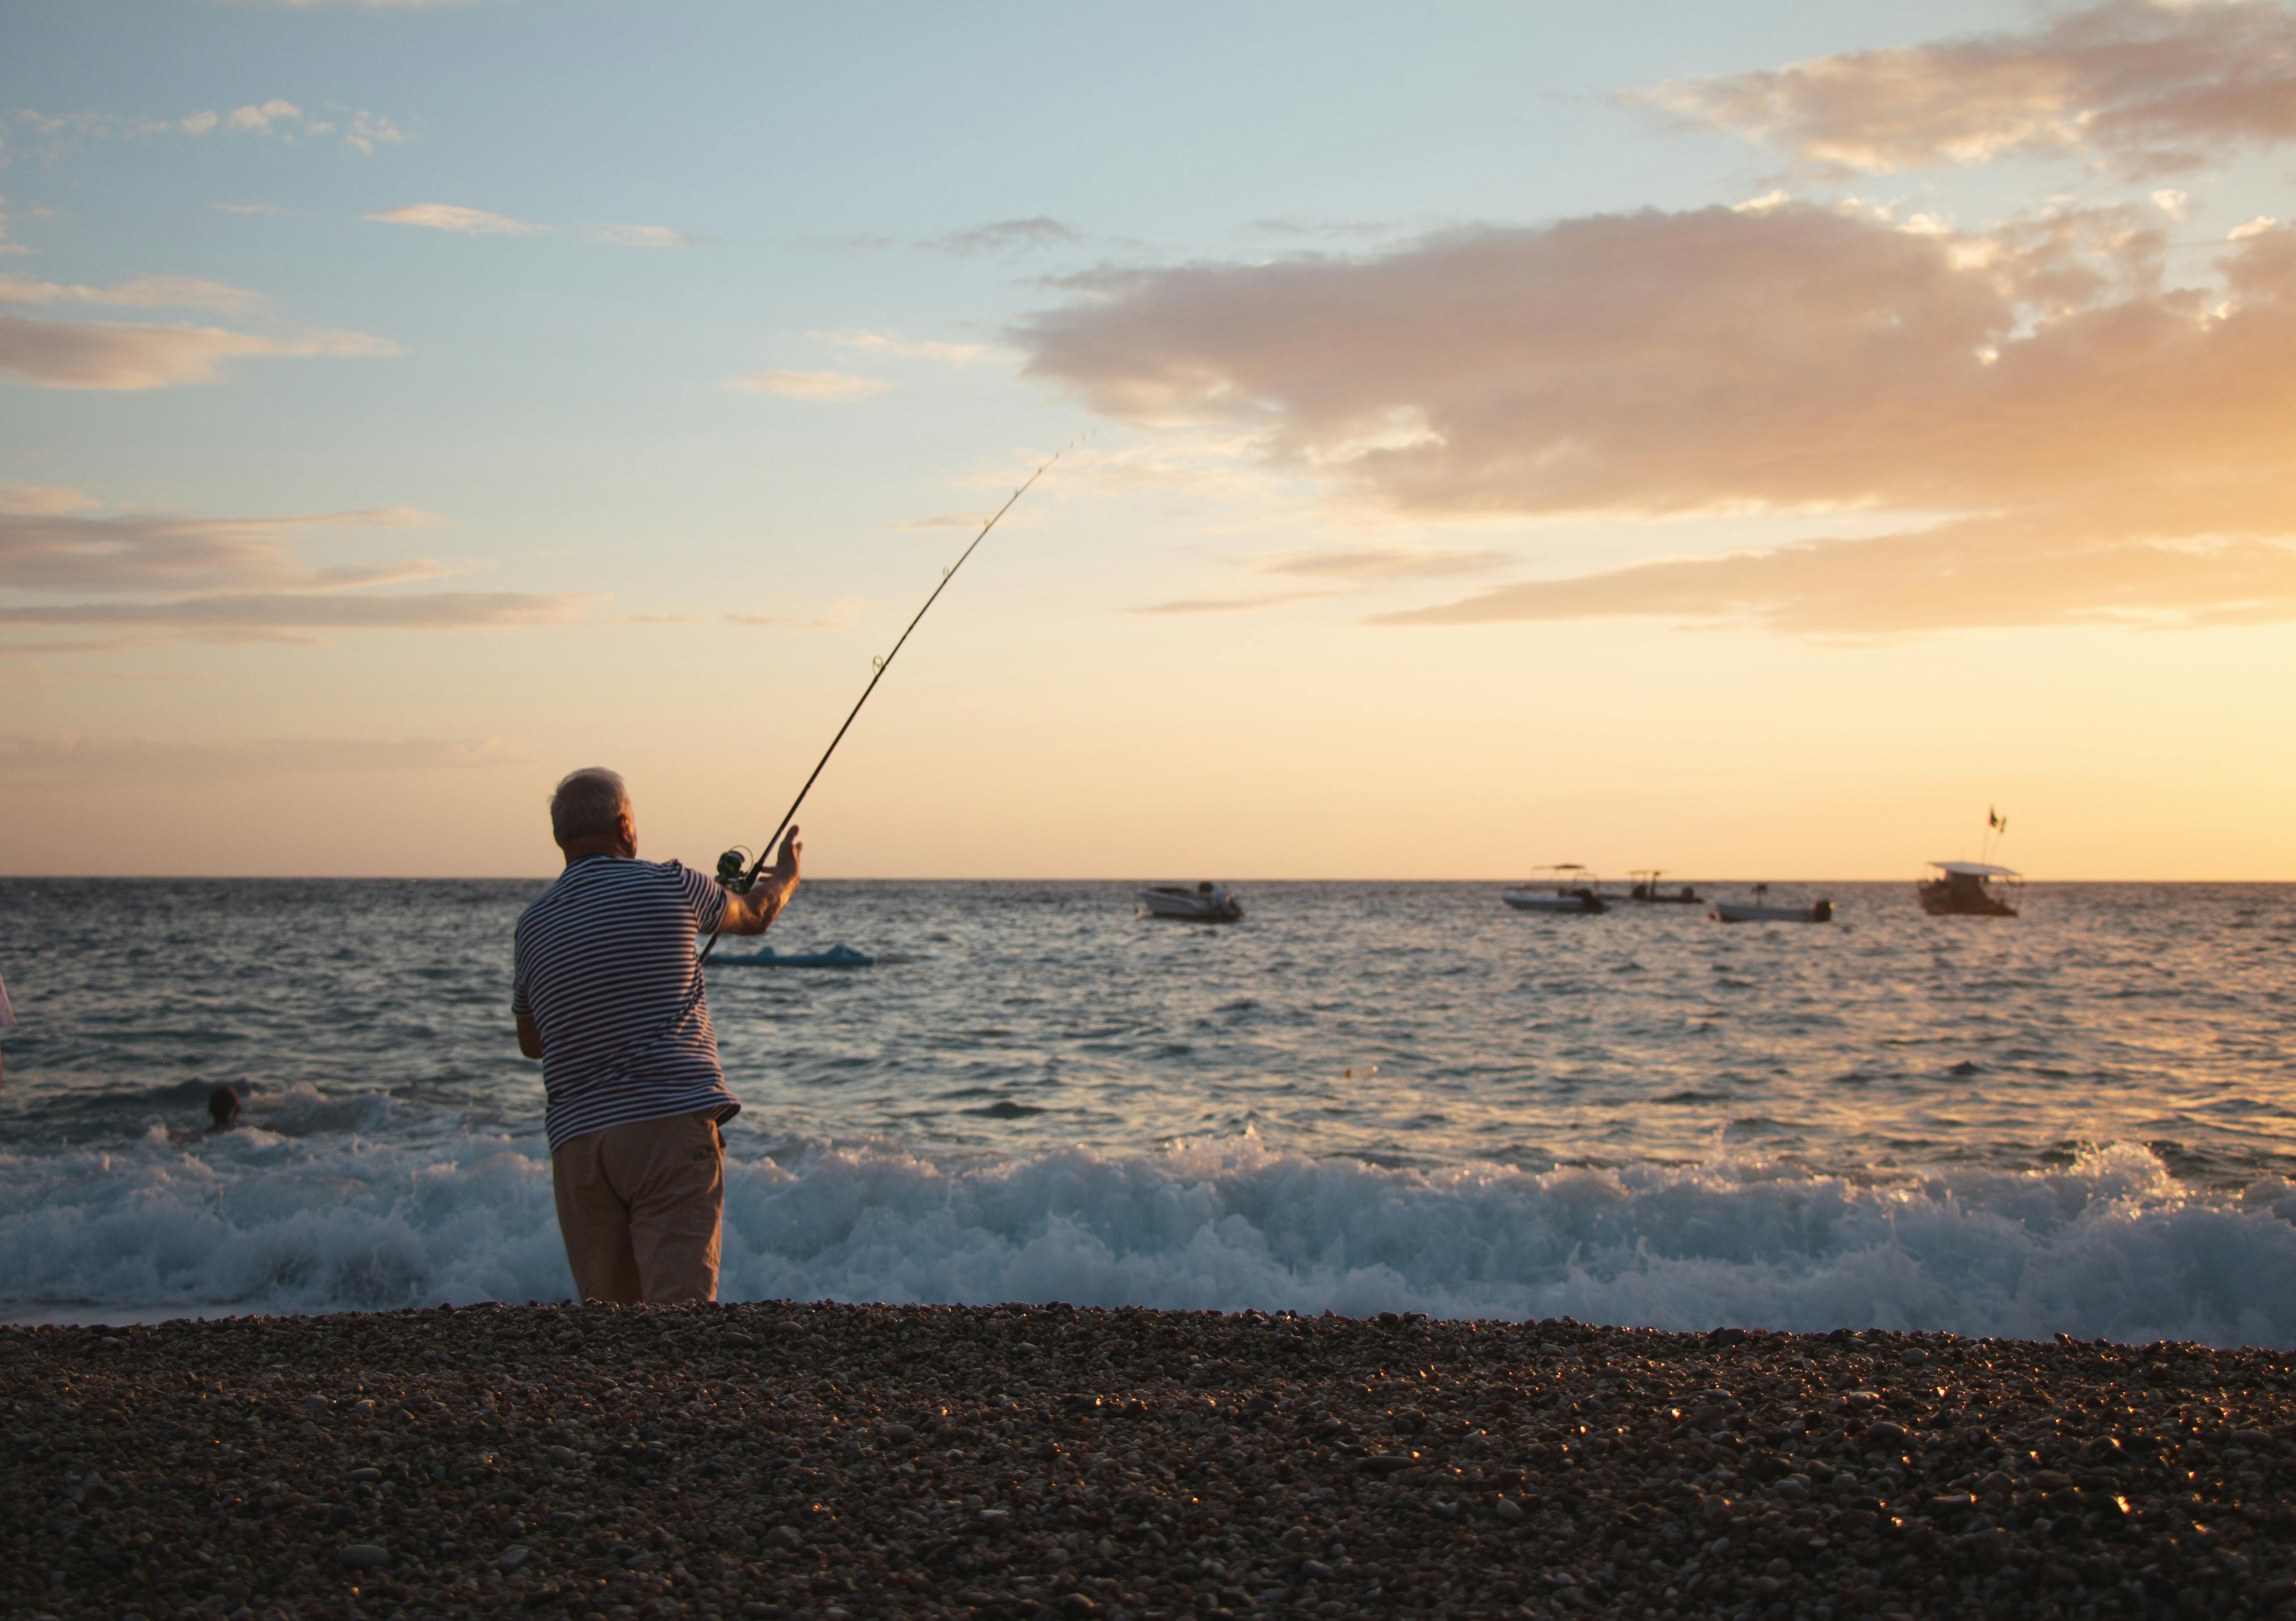 Surf Fishing Pole - Free Stock Photo by Vincent alvino on